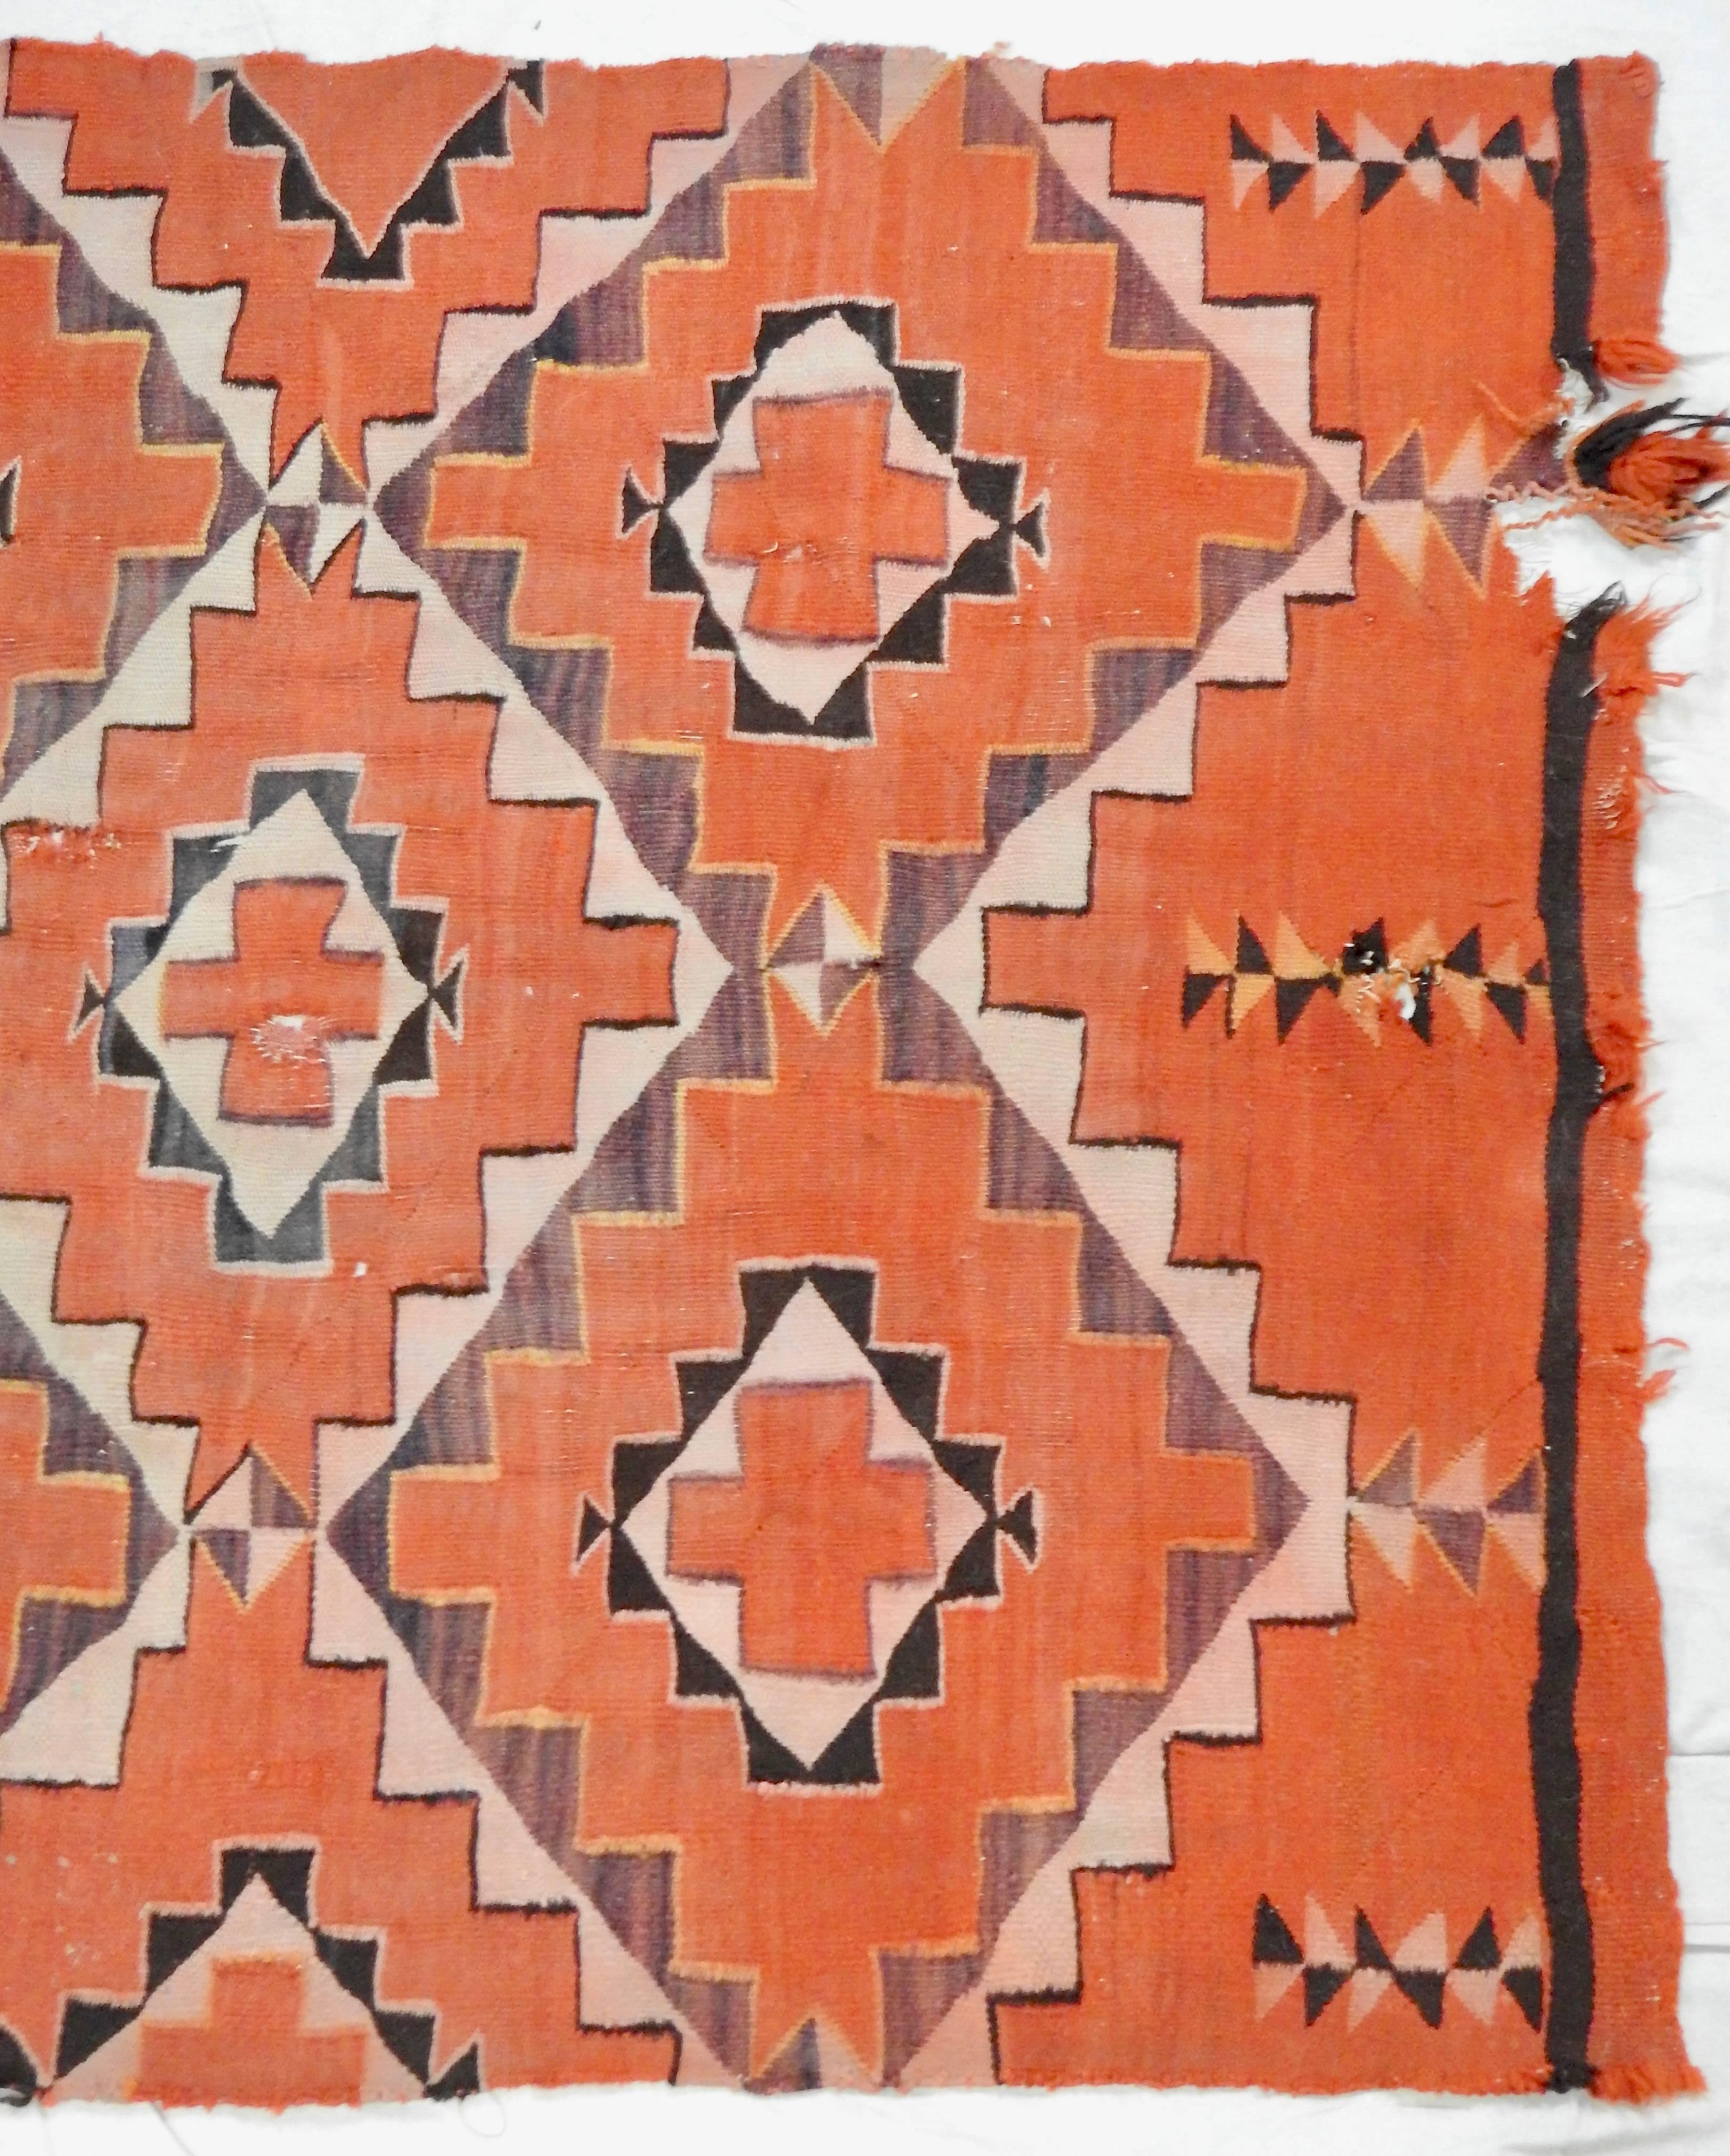 This is an antique handwoven Navajo transitional textile, circa 1900. This antique wool rug features a Native American design after a Ganado pattern of stepped diamonds, cross-shapes, and hooks over a red ground. Rendered in a palette of red, mauve,